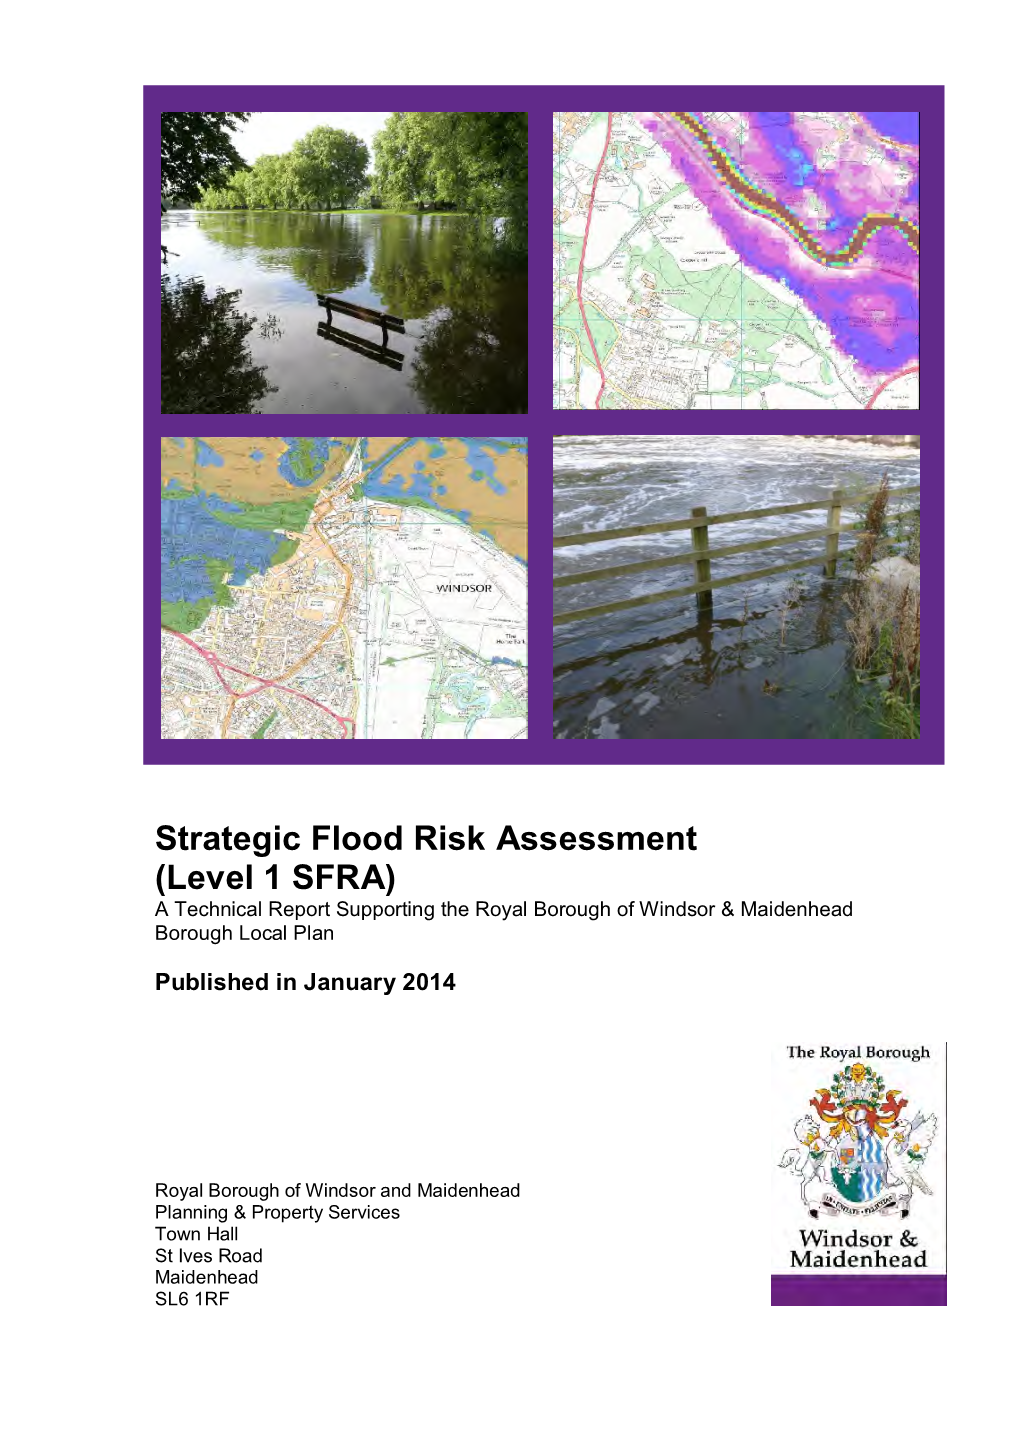 Strategic Flood Risk Assessment (Level 1 SFRA) a Technical Report Supporting the Royal Borough of Windsor & Maidenhead Borough Local Plan